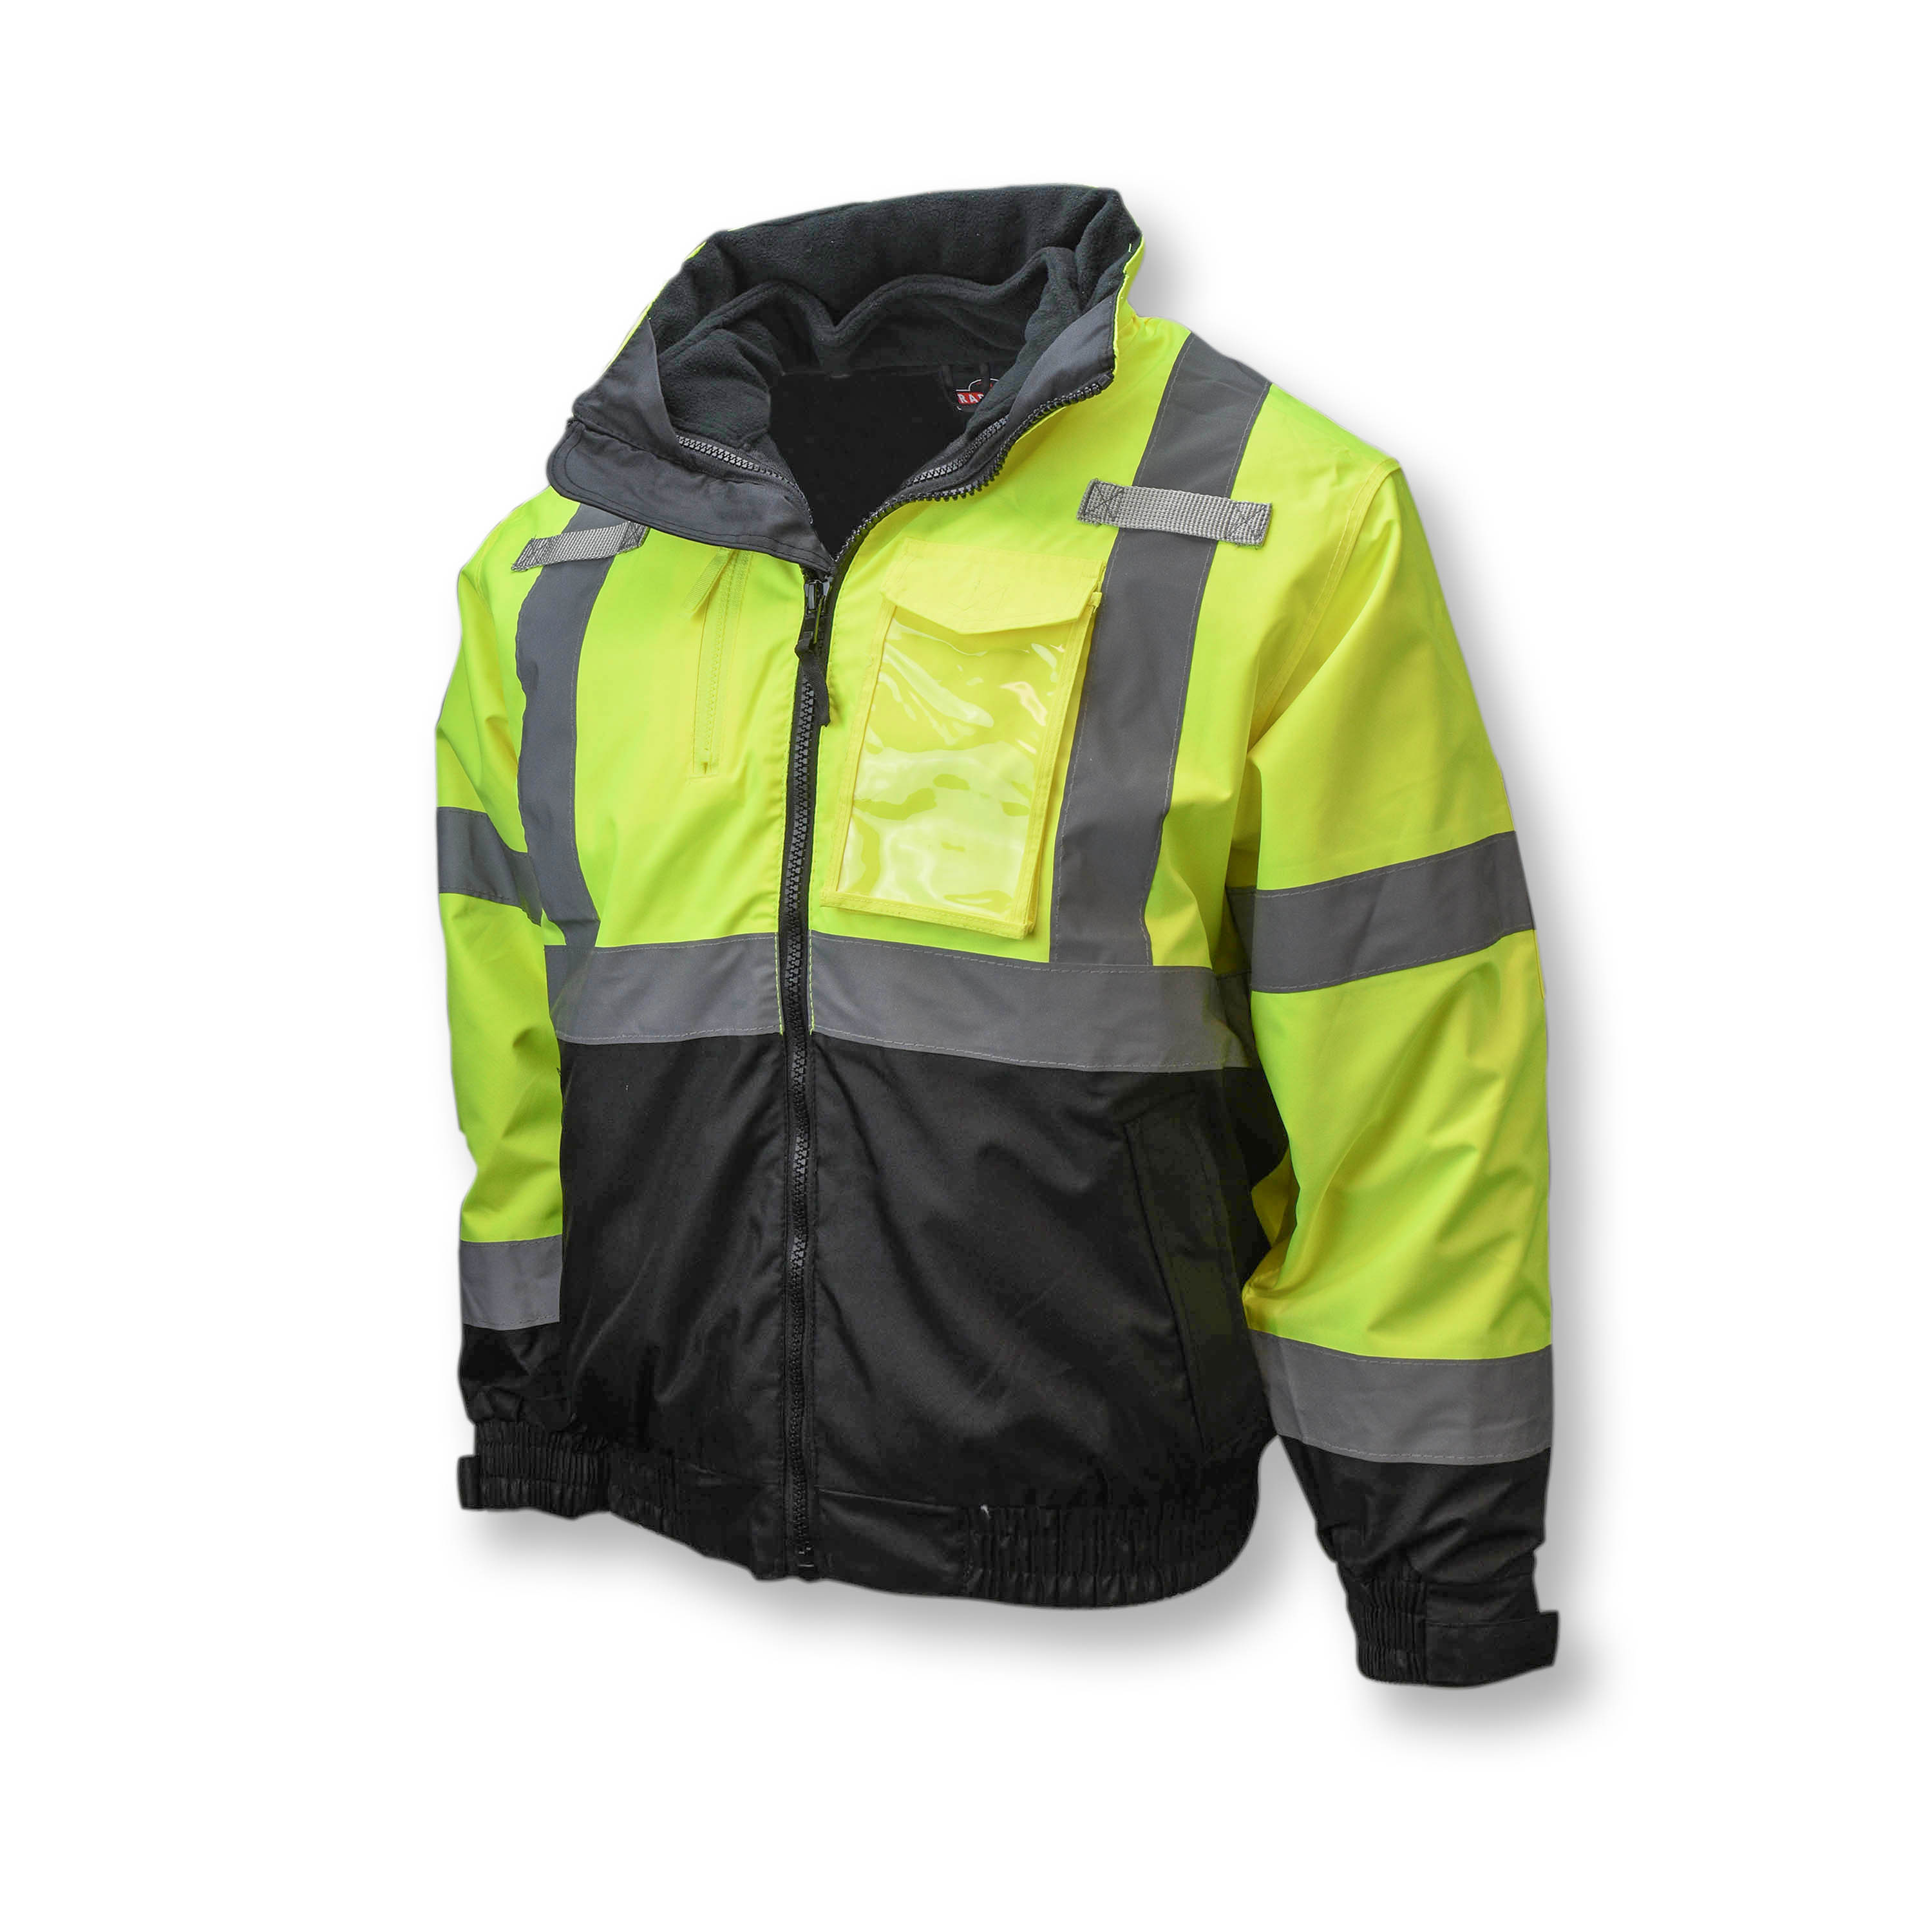 SJ210B Three-in-One Deluxe High Visibility Bomber Jacket - Green/Black Bottom - Size 2X